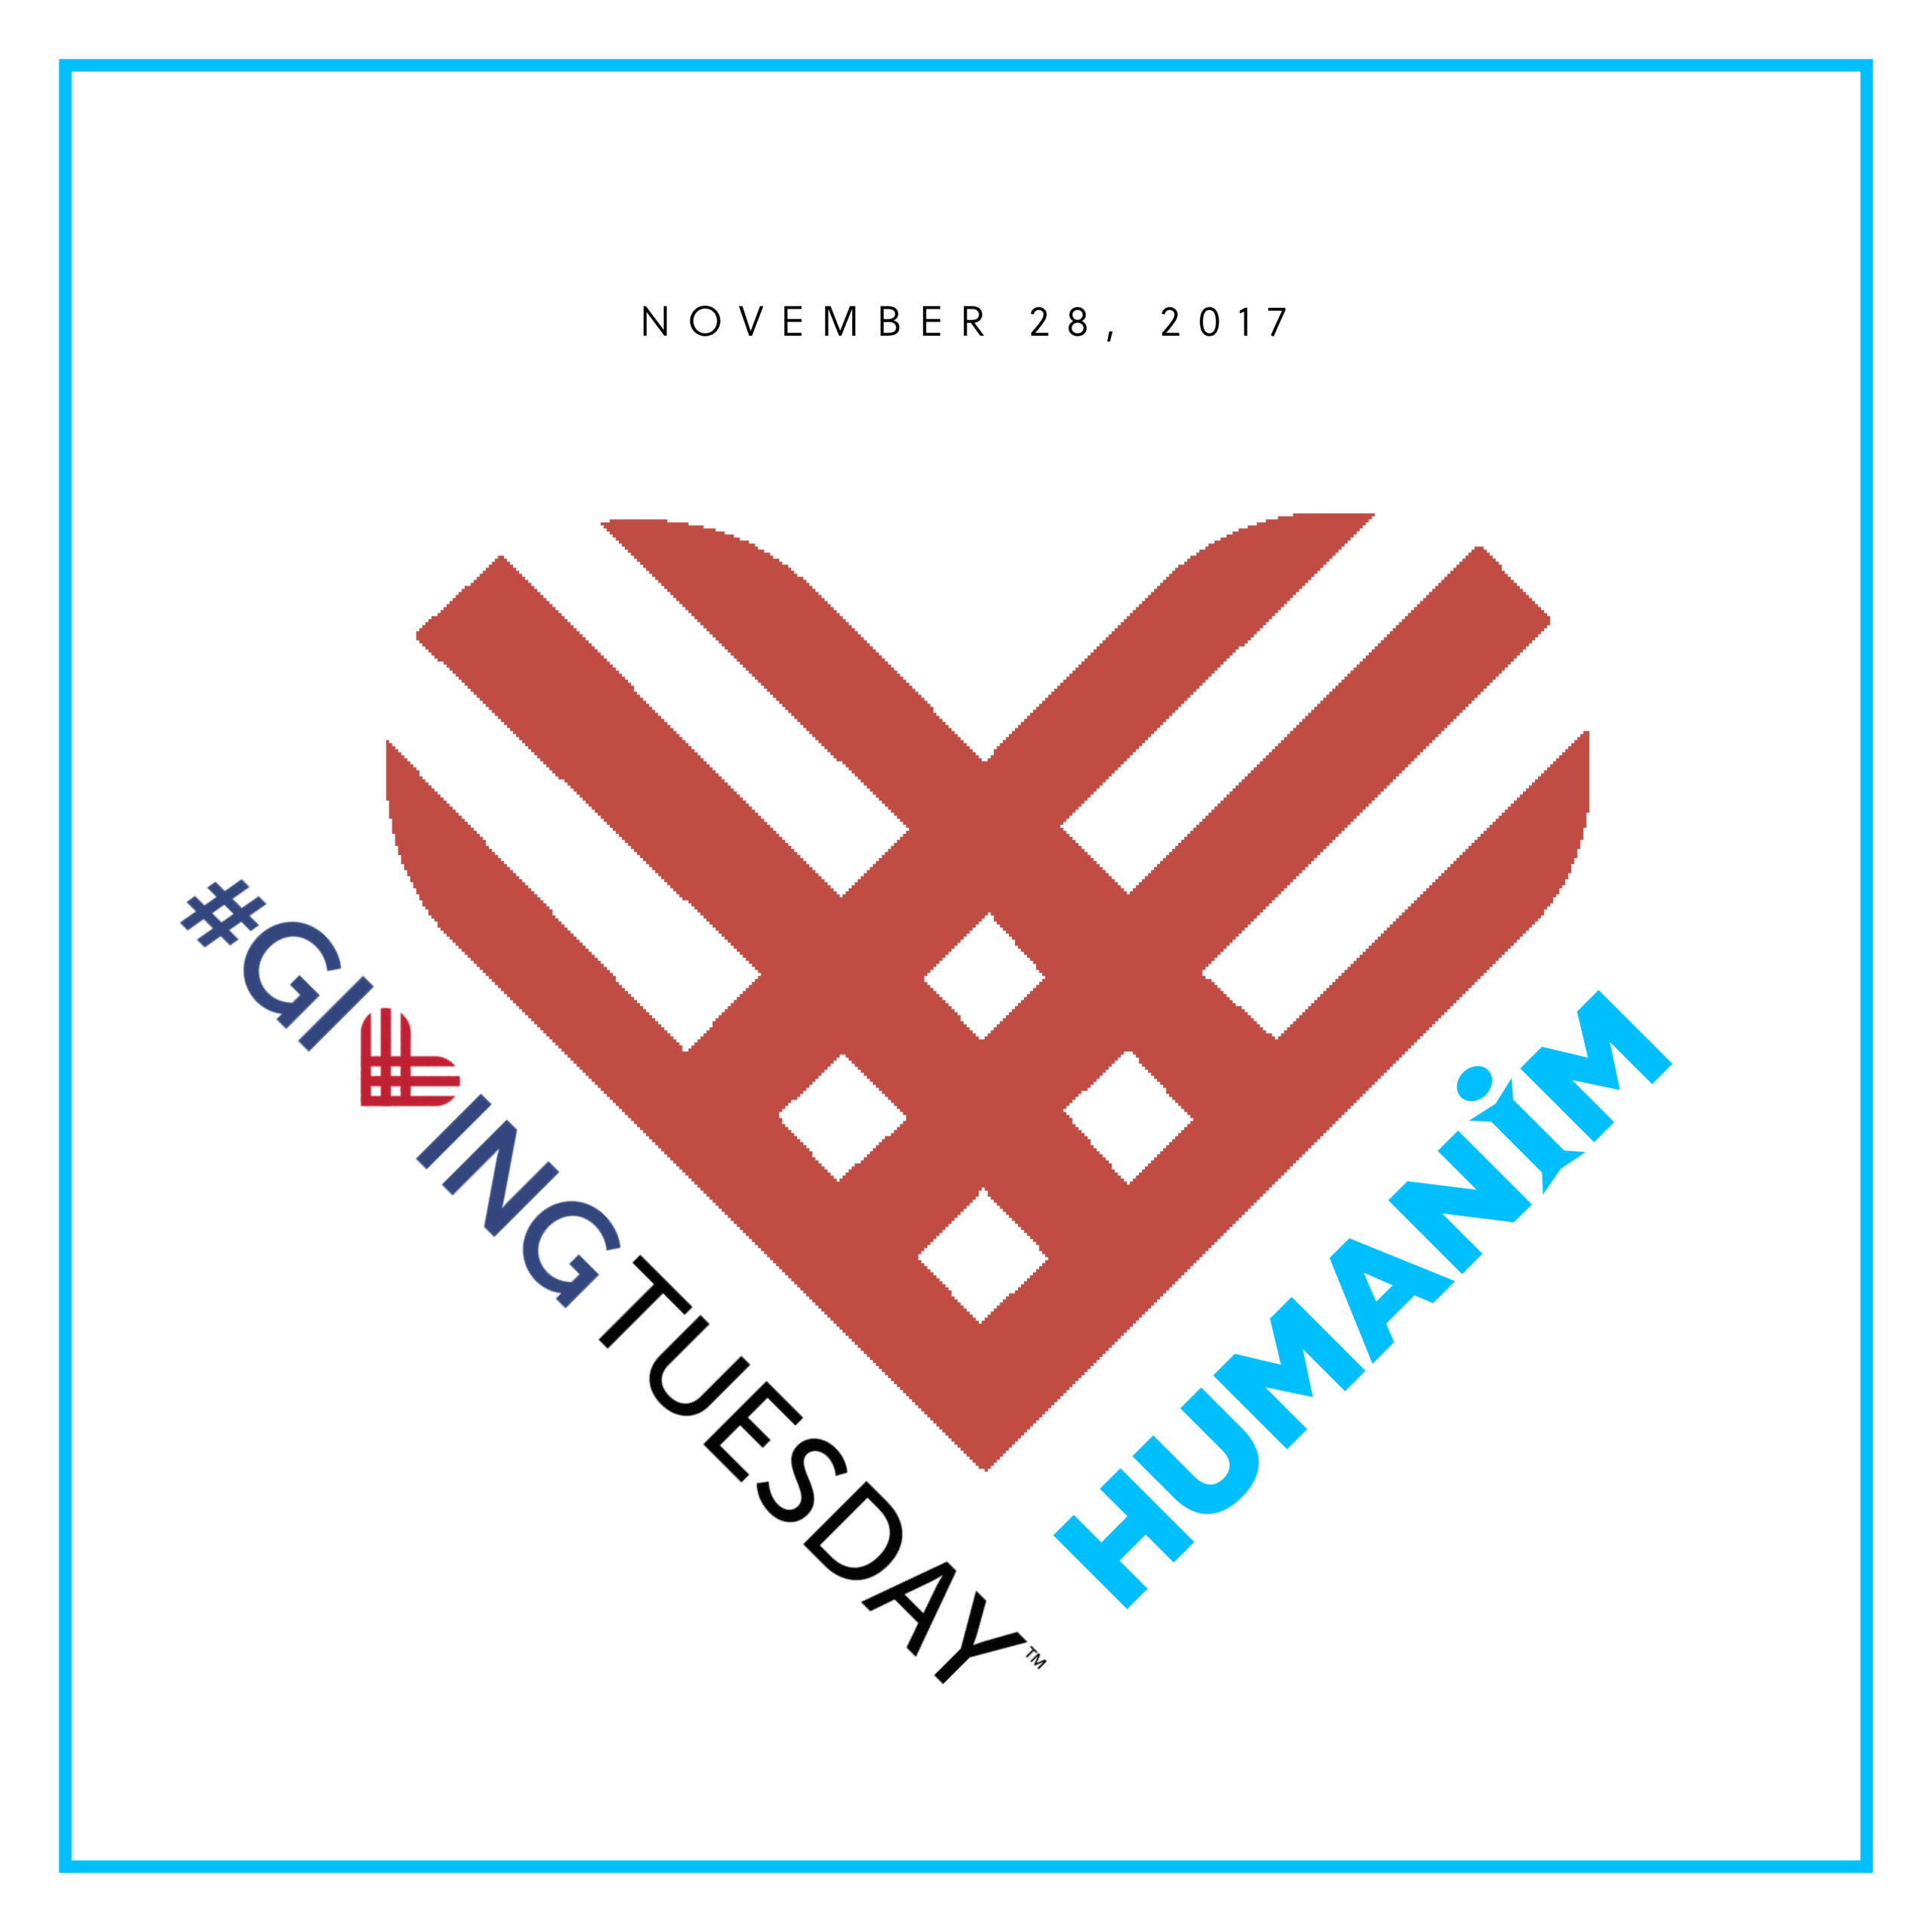 Support Humanim this Giving Tuesday